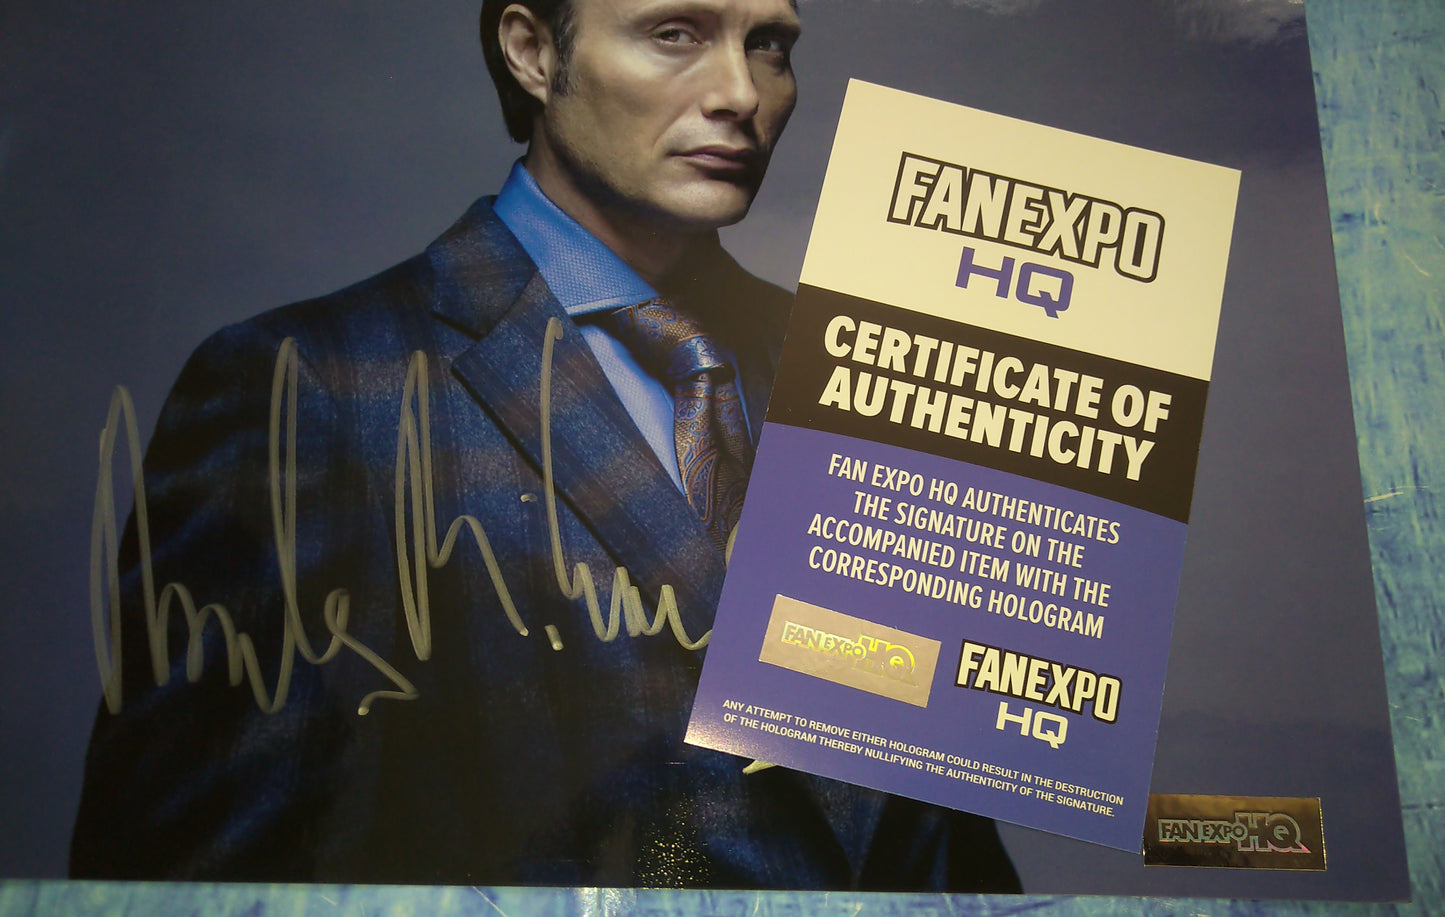 Mads Mikkelsen Hand Signed Autograph 8x10 Photo